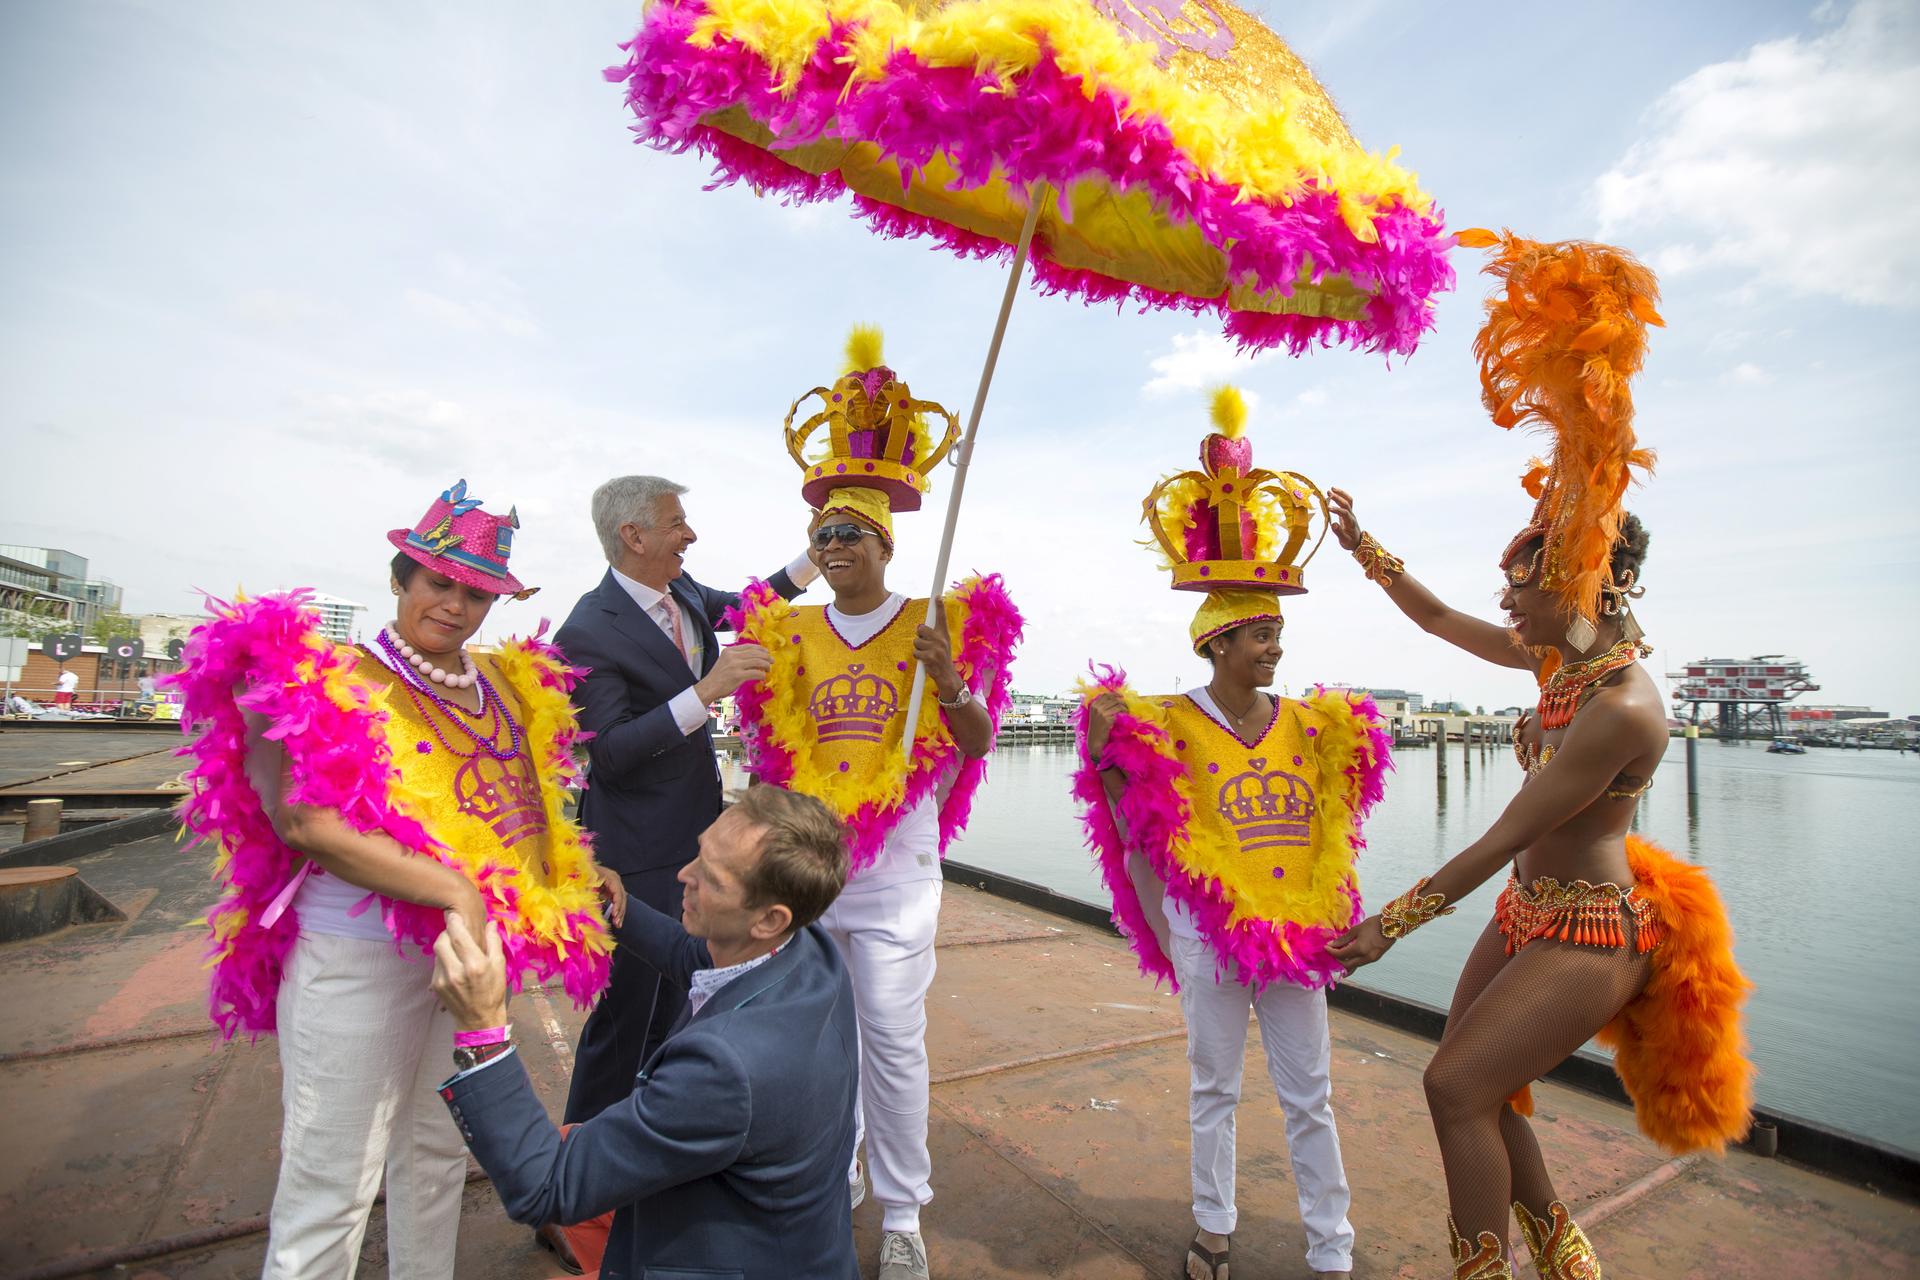 The Netherlands' Minister of Kingdom Relations Ronald Plasterk (2nd L, top) helps adjust costumes of participants from Curacao before their boat leaves for the festival's canal parade in Amsterdam, the Netherlands August 1, 2015.